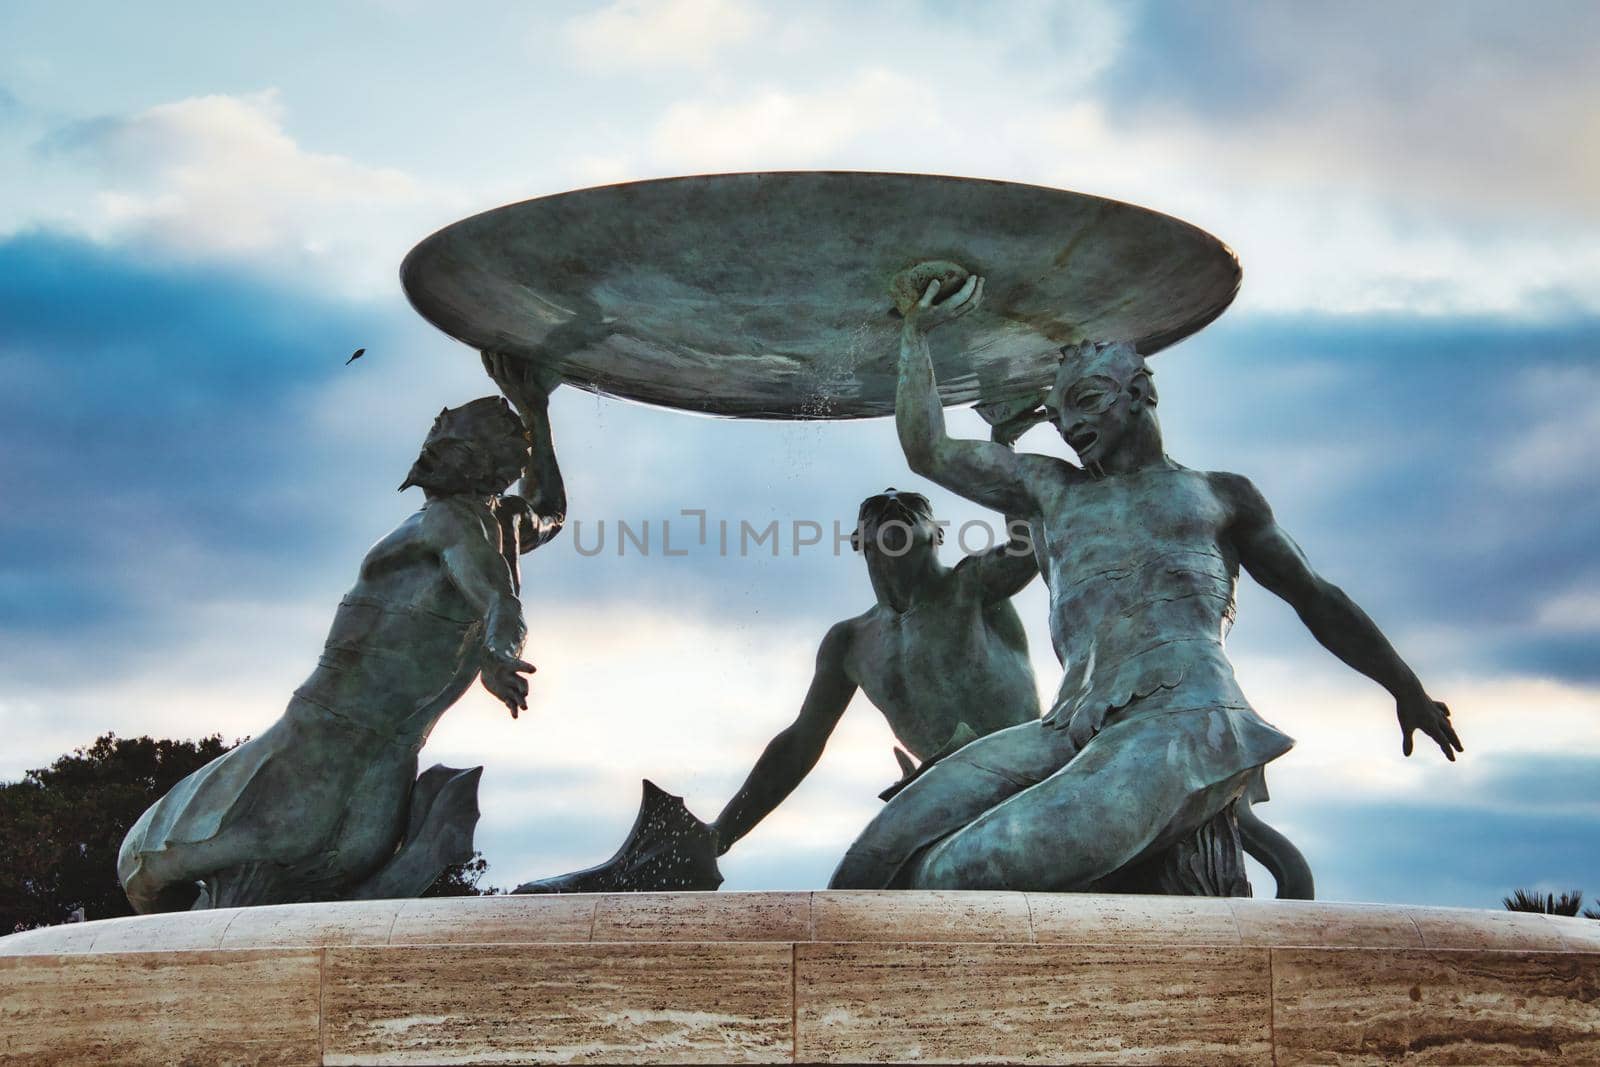 Valletta, Malta - January 01 2020: Triton's fountain in bronze at the city gate of Valletta, Malta, viewed from below by tennesseewitney